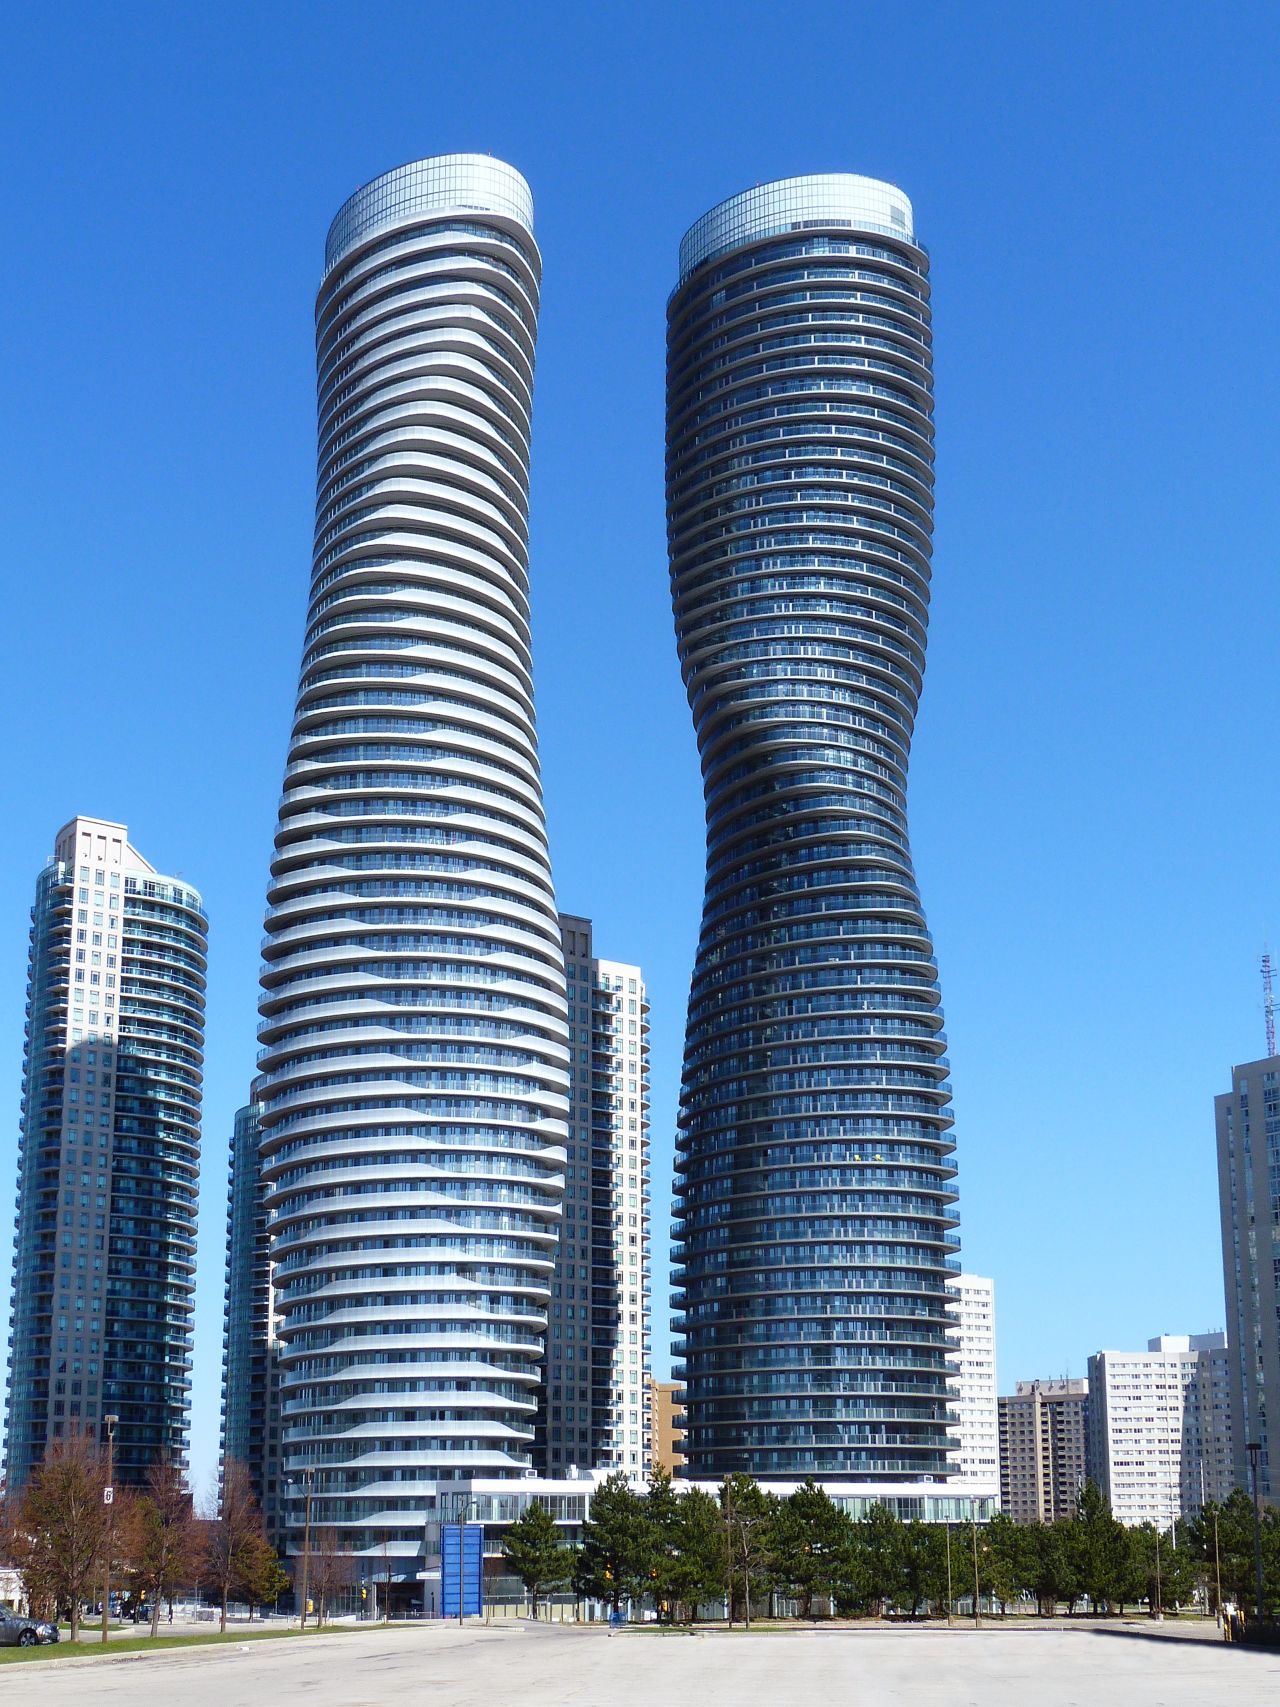 Absolute World Tower 1 & 2 form part of the Absolute City Centre complex, an inner-city  ensemble consisting of five residential towers.Due to their curved shape, with no floor appearing the same, the two towers were given the nickname "Marilyn Monroe."<strong>Architects</strong>: MAD, Ltd.; Burka Architects 